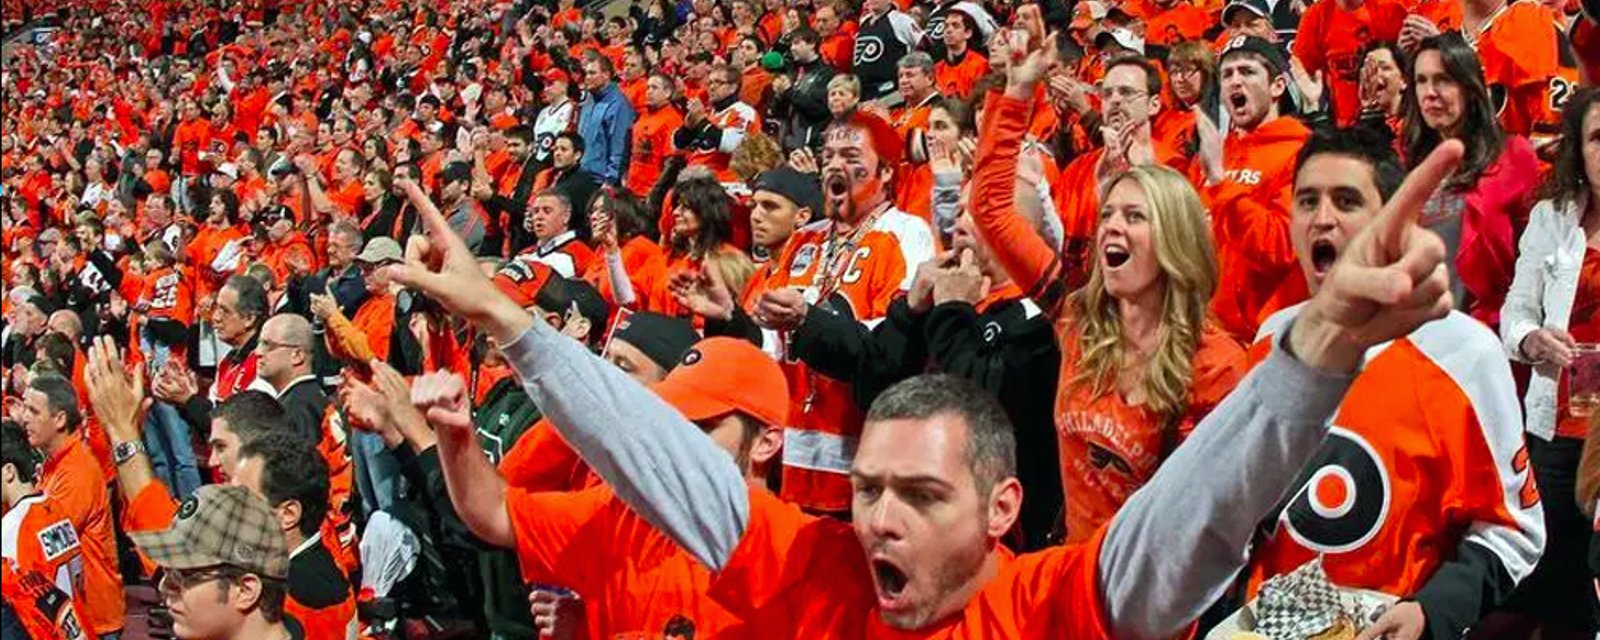 Flyers become the first NHL team to step up and offer refunds for postponed games